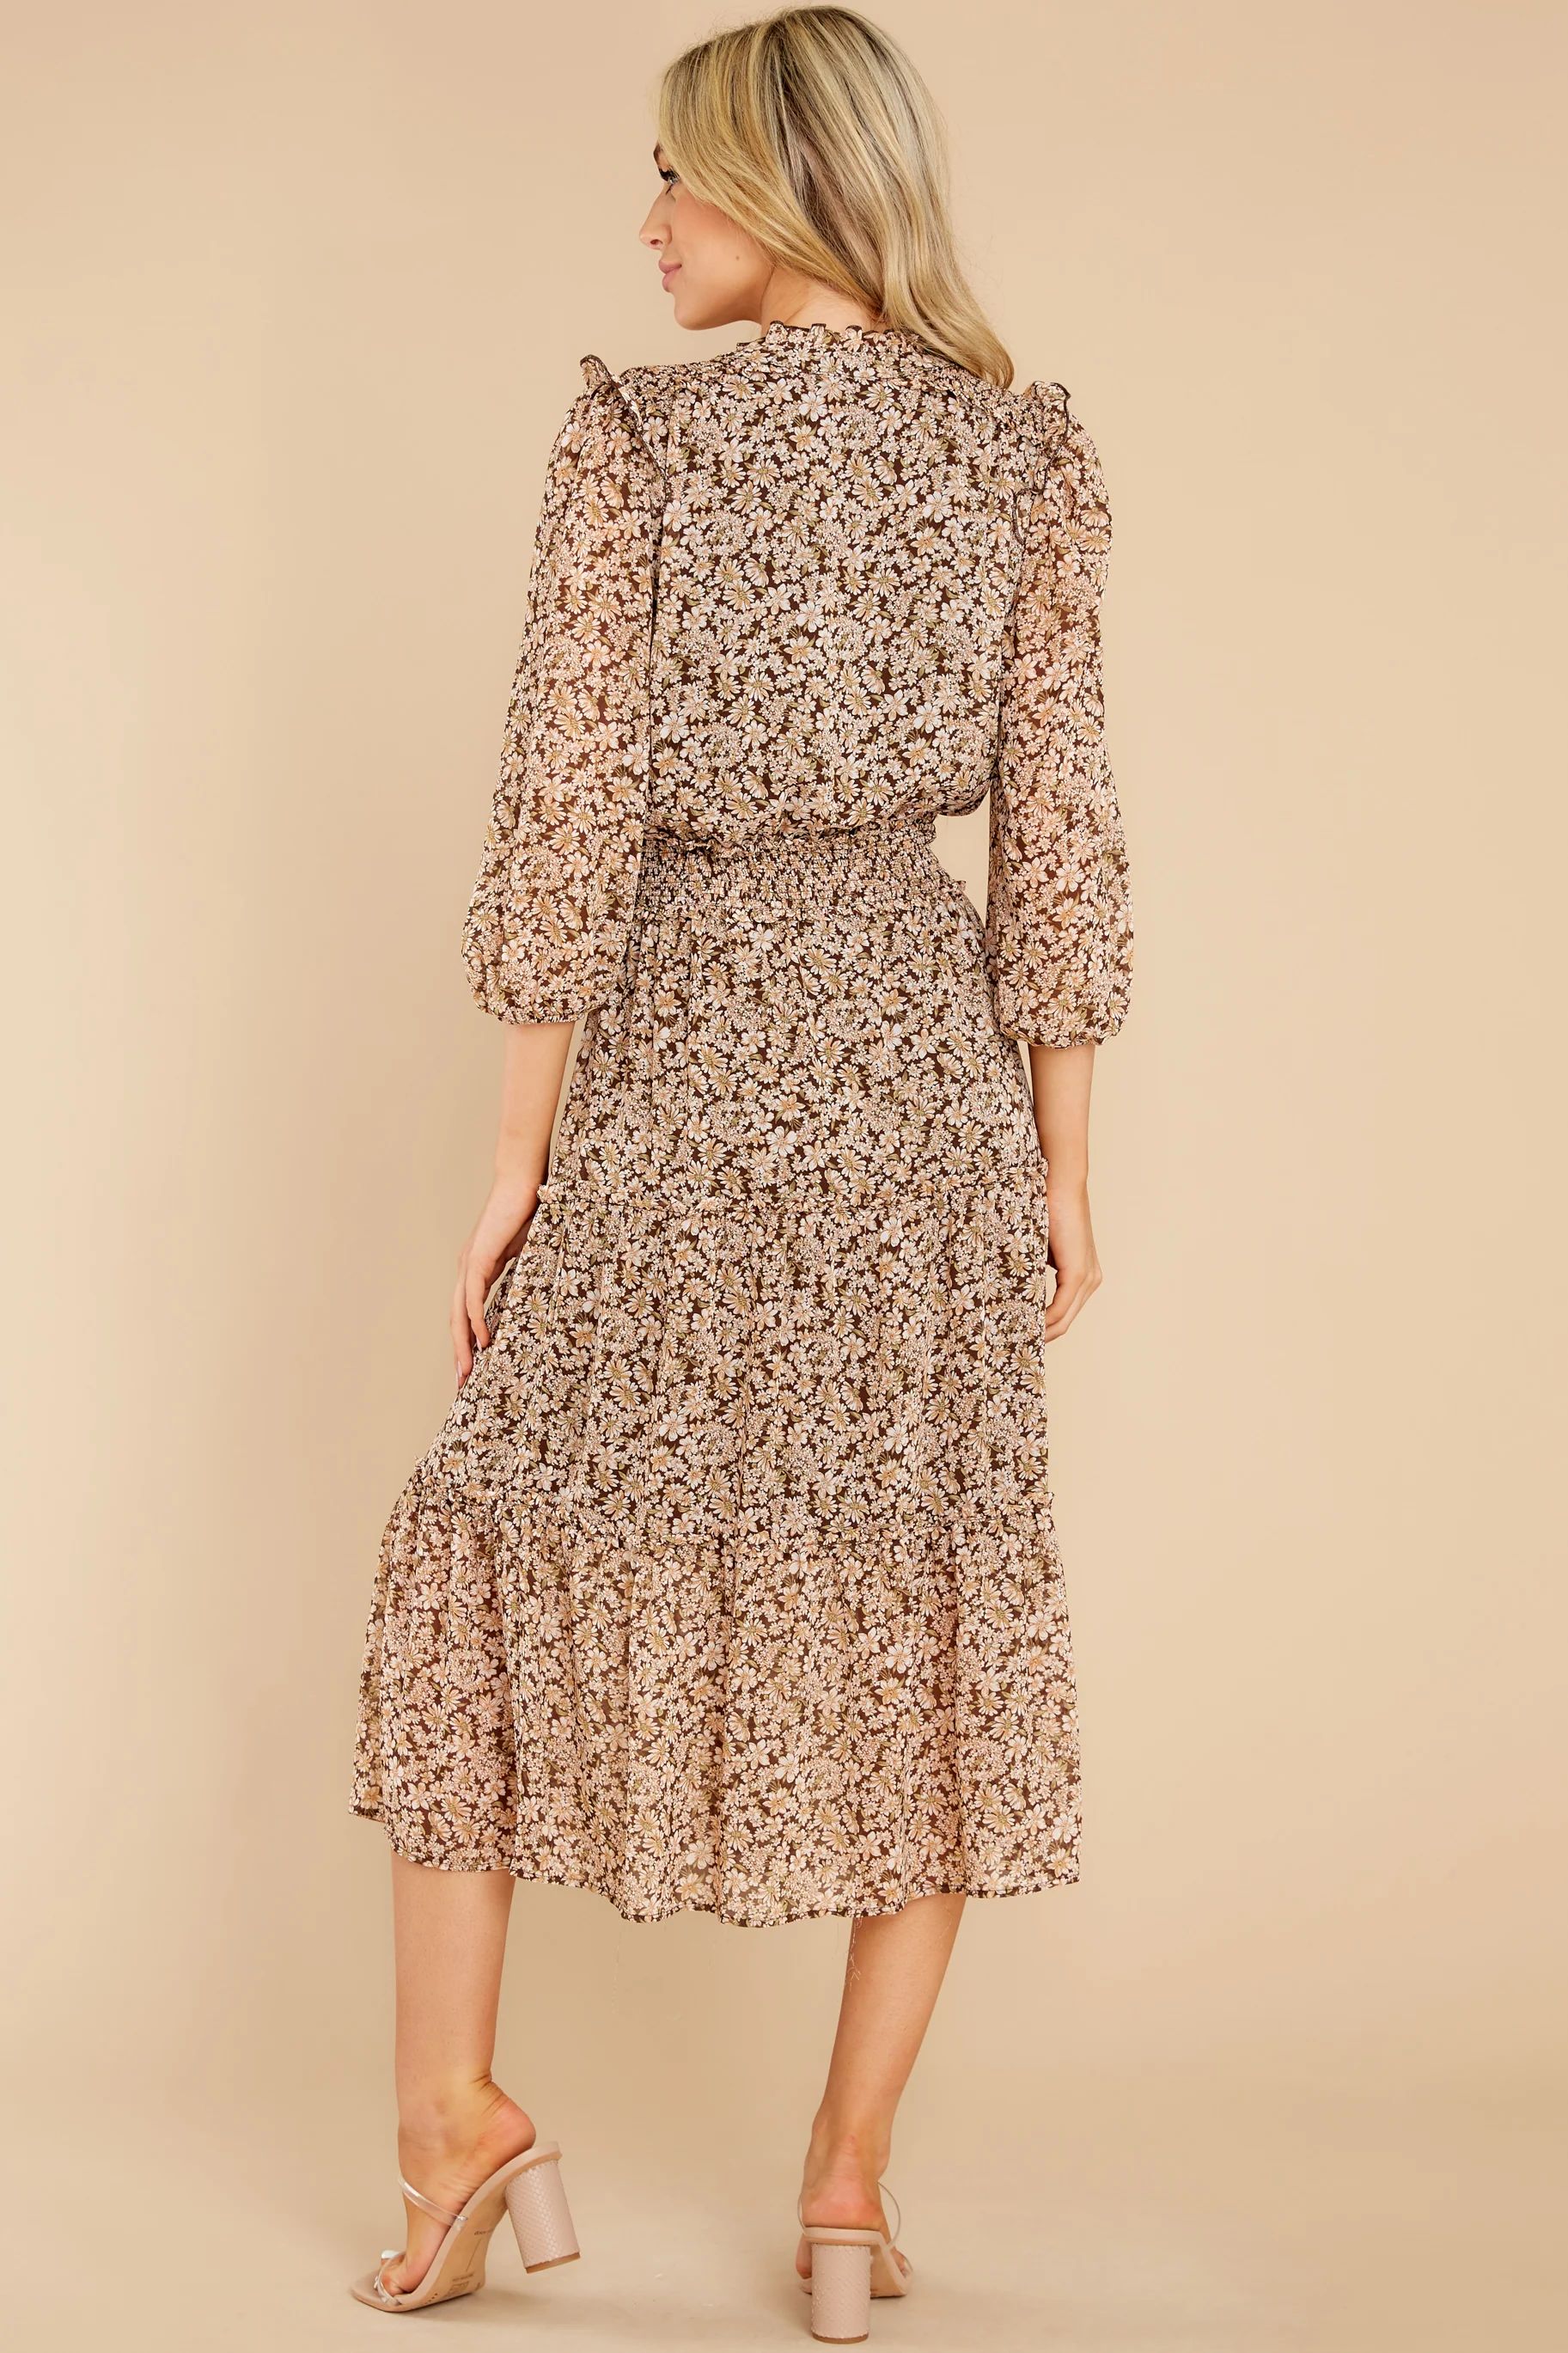 Crunch The Leaves Brown Floral Print Midi Dress | Red Dress 